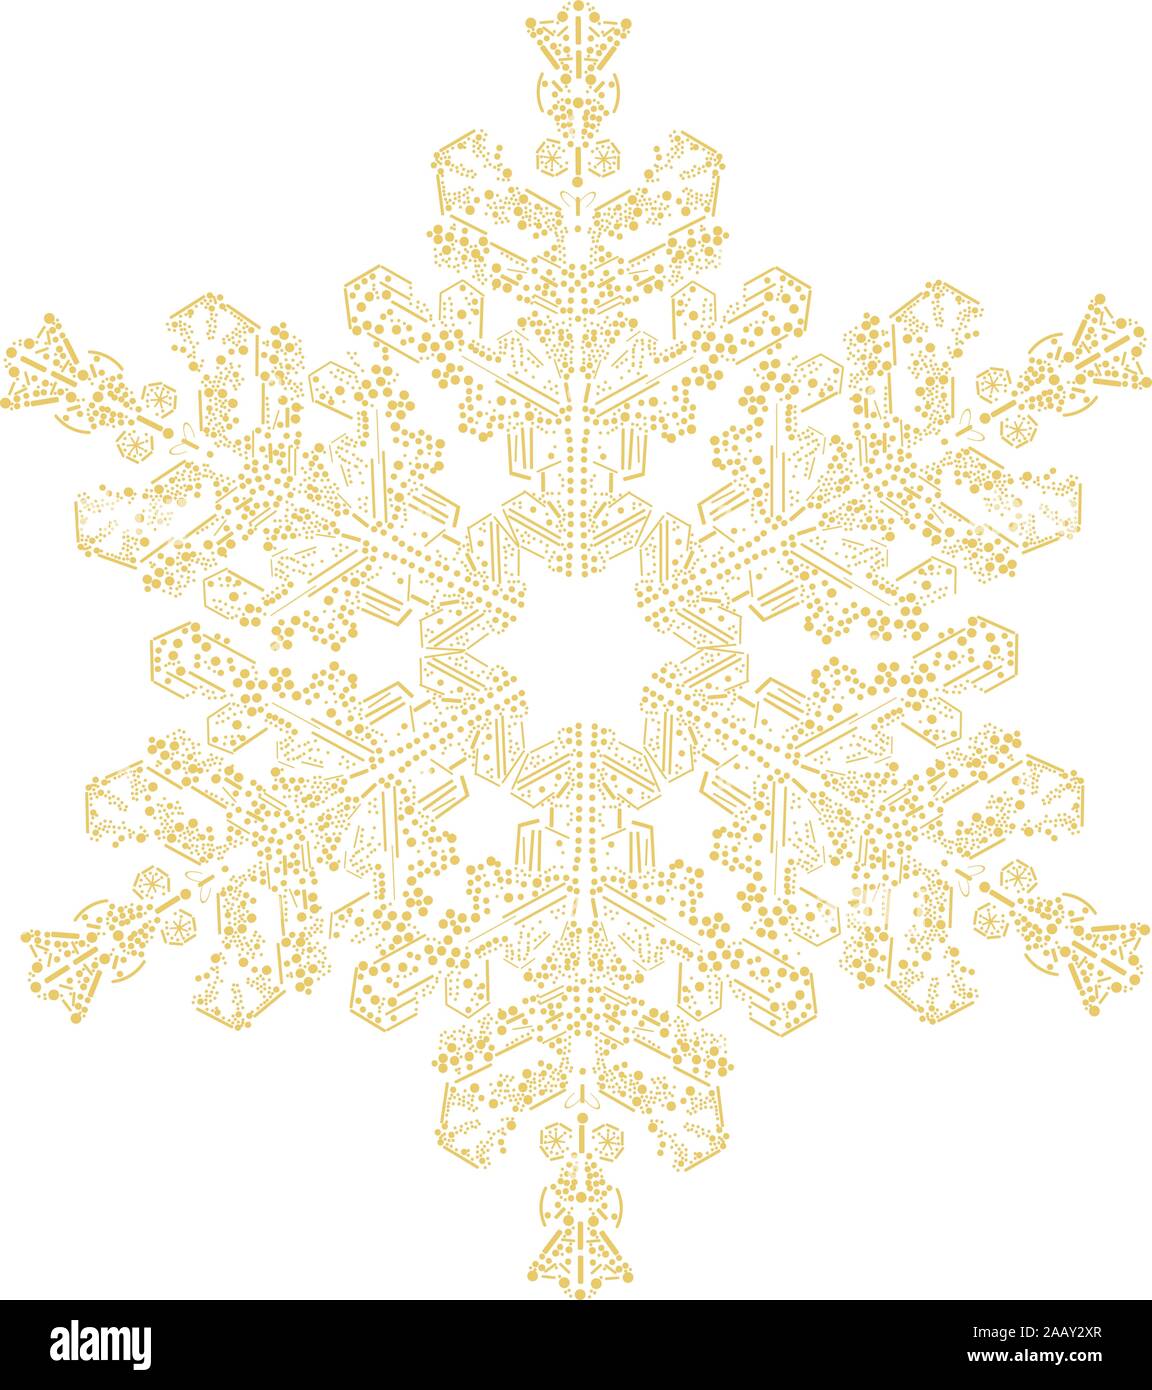 vector illustration of a golden snowflake. Christmas abstract. Stock Vector